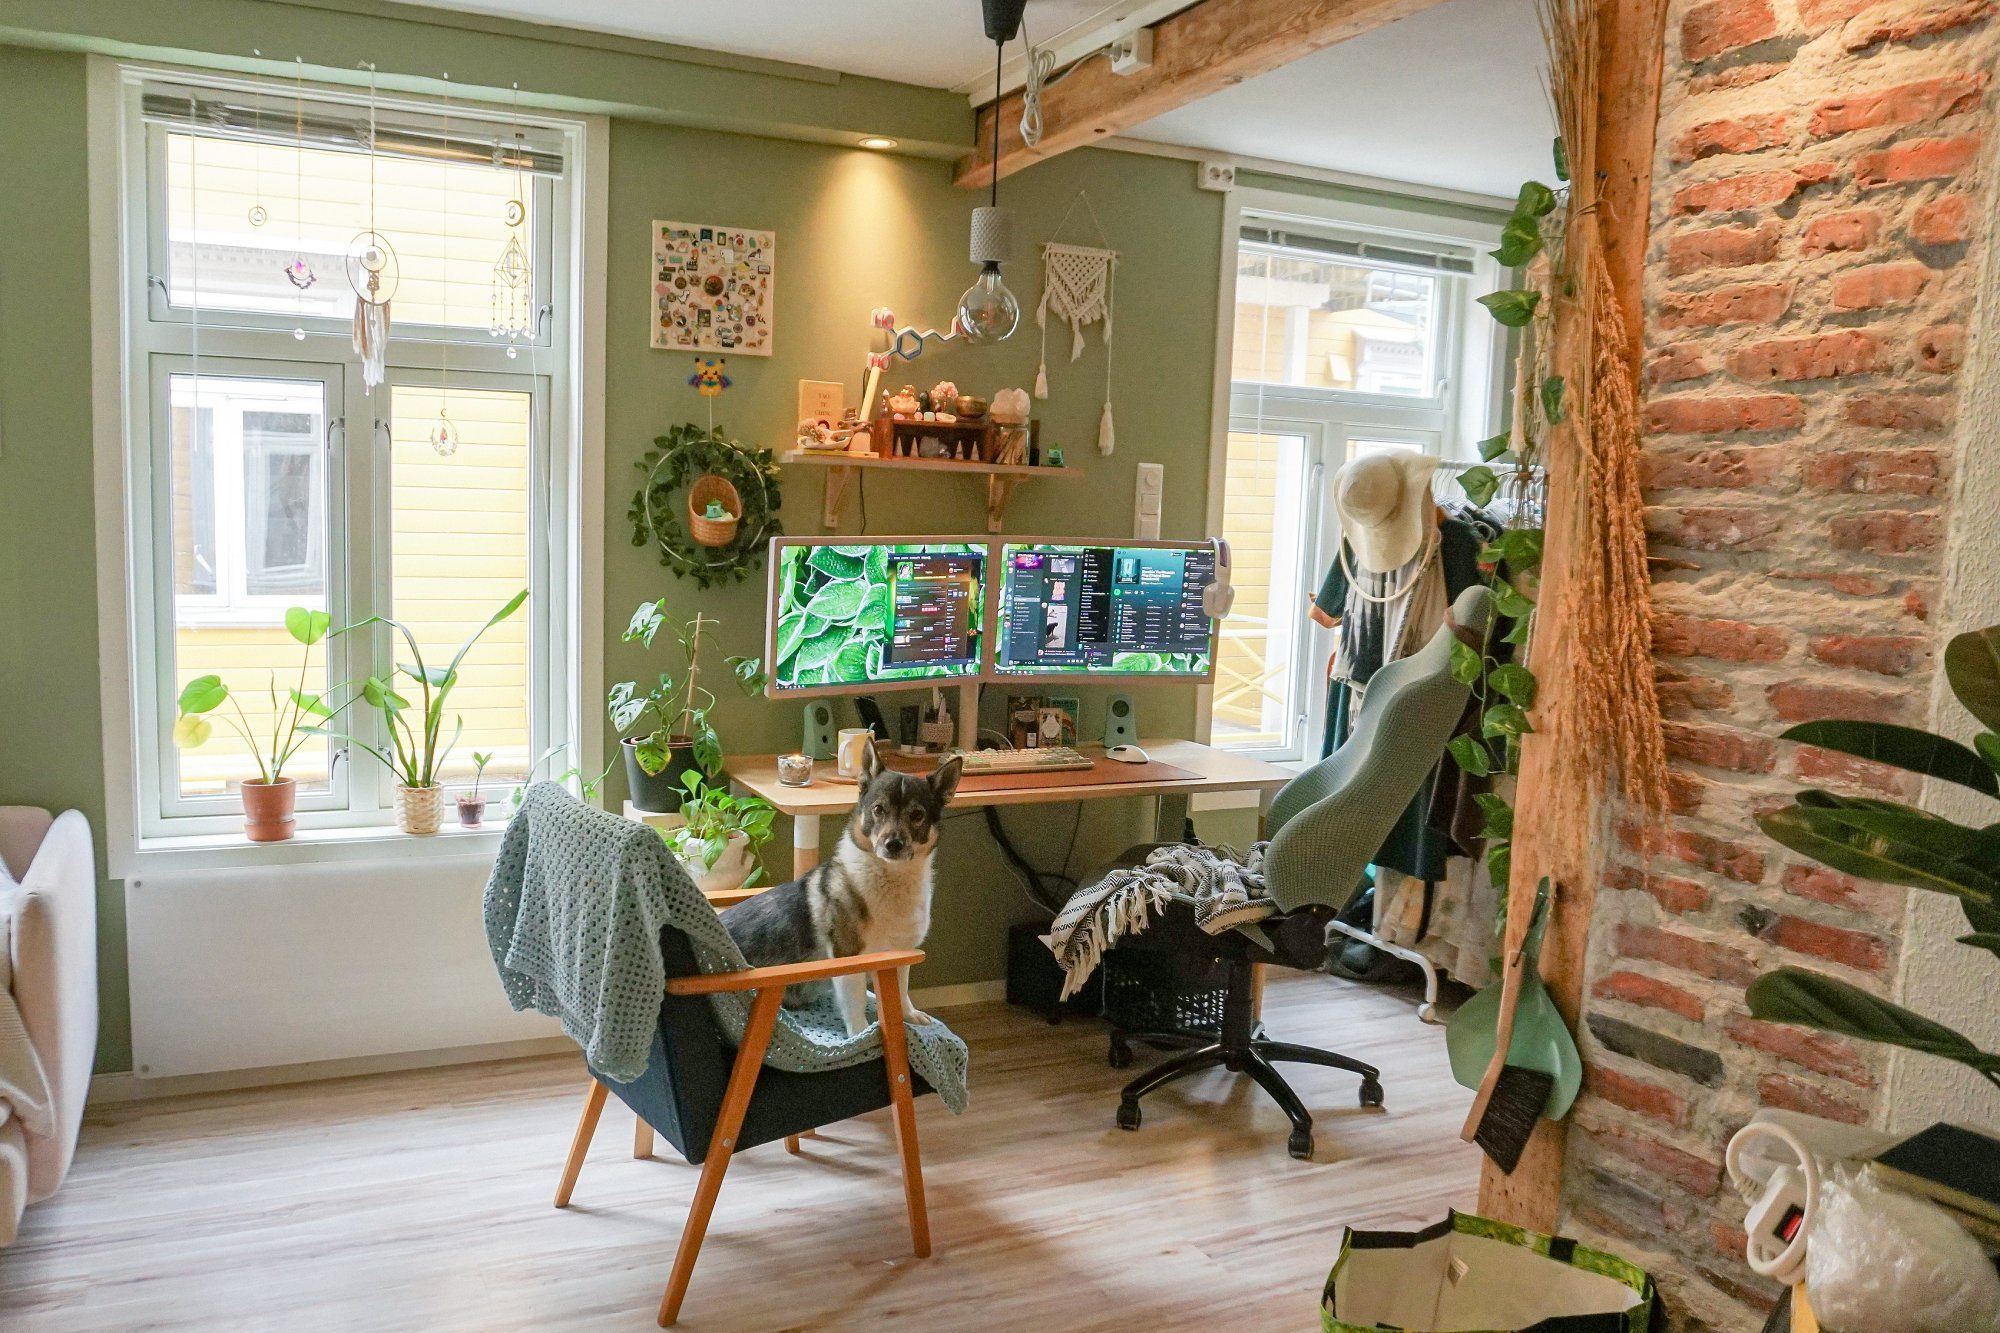 A cosy home office setup with a dual monitor computer desk surrounded by indoor plants, a brick column on the right, and a window with blinds on the left. A dog is sitting on a chair in the center, facing the camera. Decorative items and a dream catcher hang by the window, adding a personal touch to the space